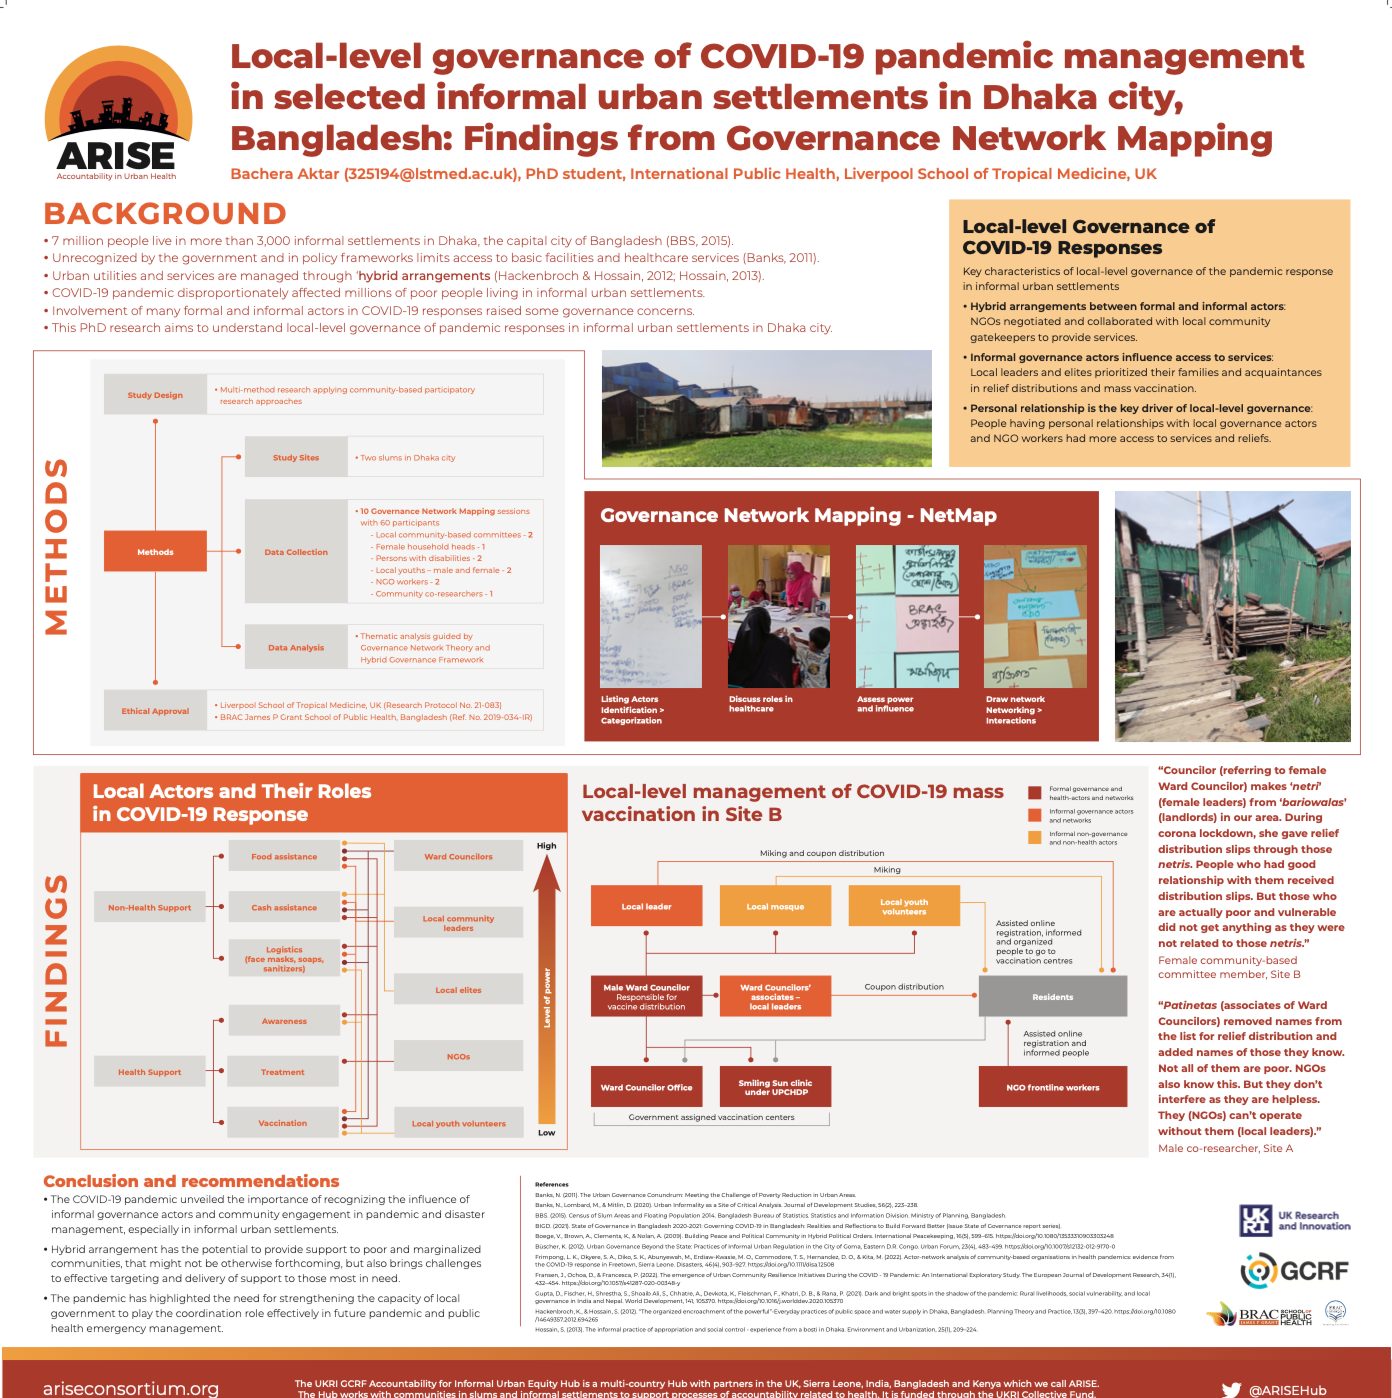 Local-level governance of COVID-19 pandemic management in selected informal urban settlements in Dhaka city, Bangladesh: Findings from Governance Network Mapping